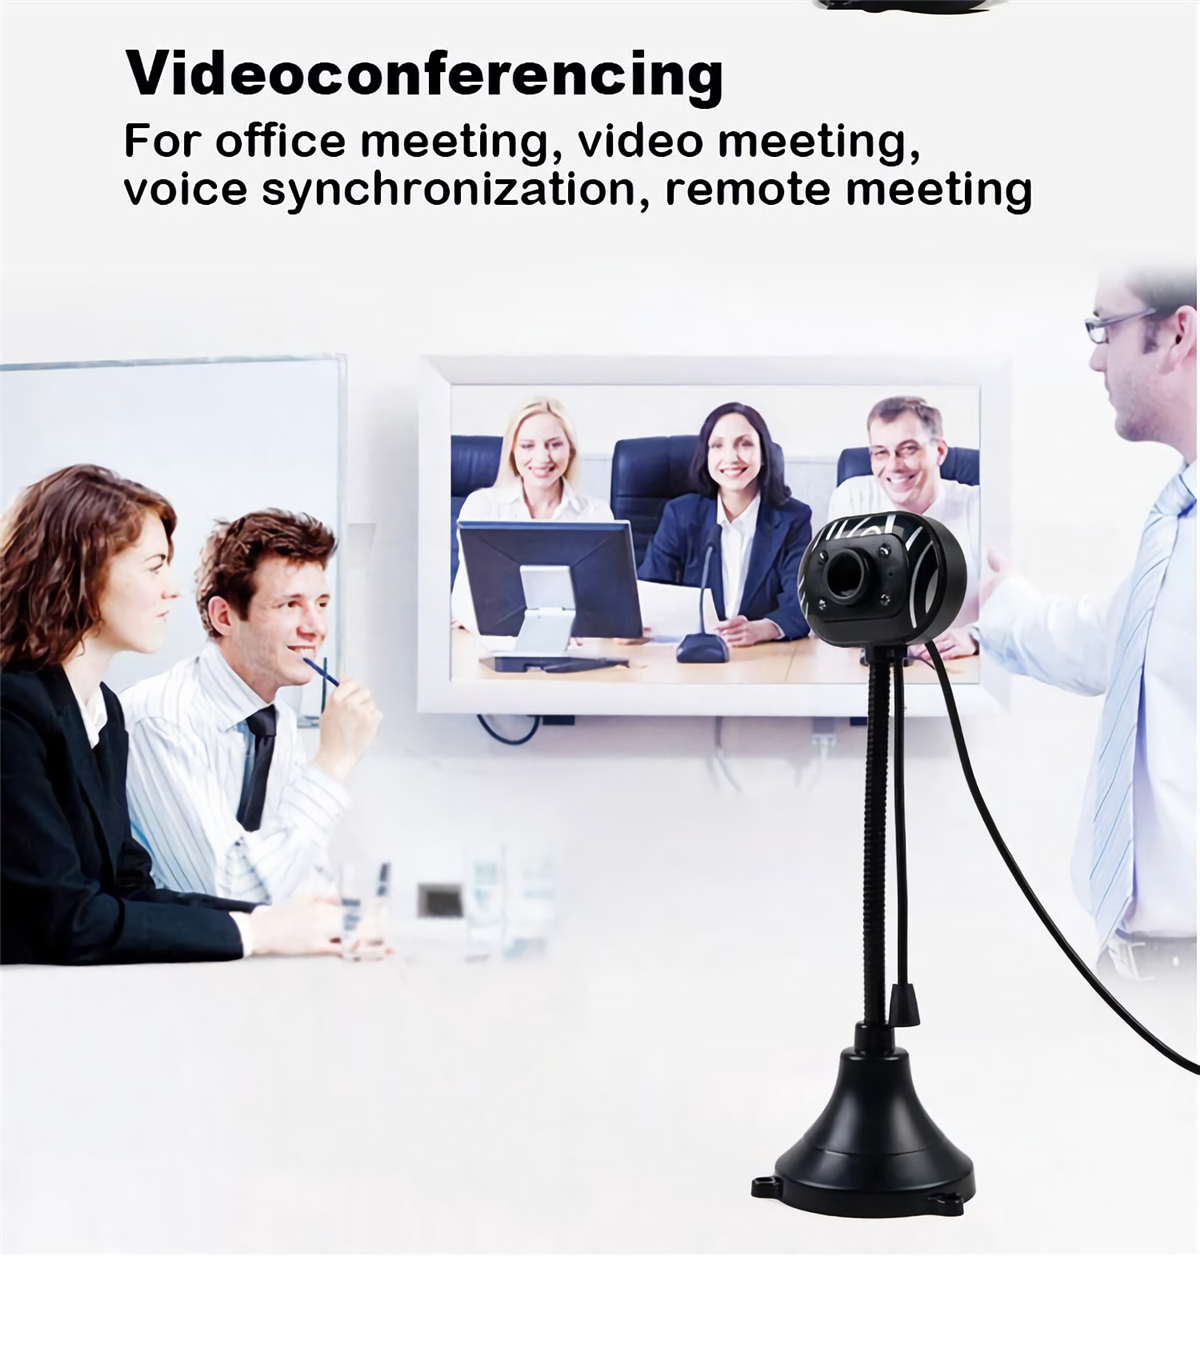 480P HD Webcam CMOS USB 2.0 Wired Computer Web Camera Built-in Microphone Camera for Desktop Computer Notebook PC